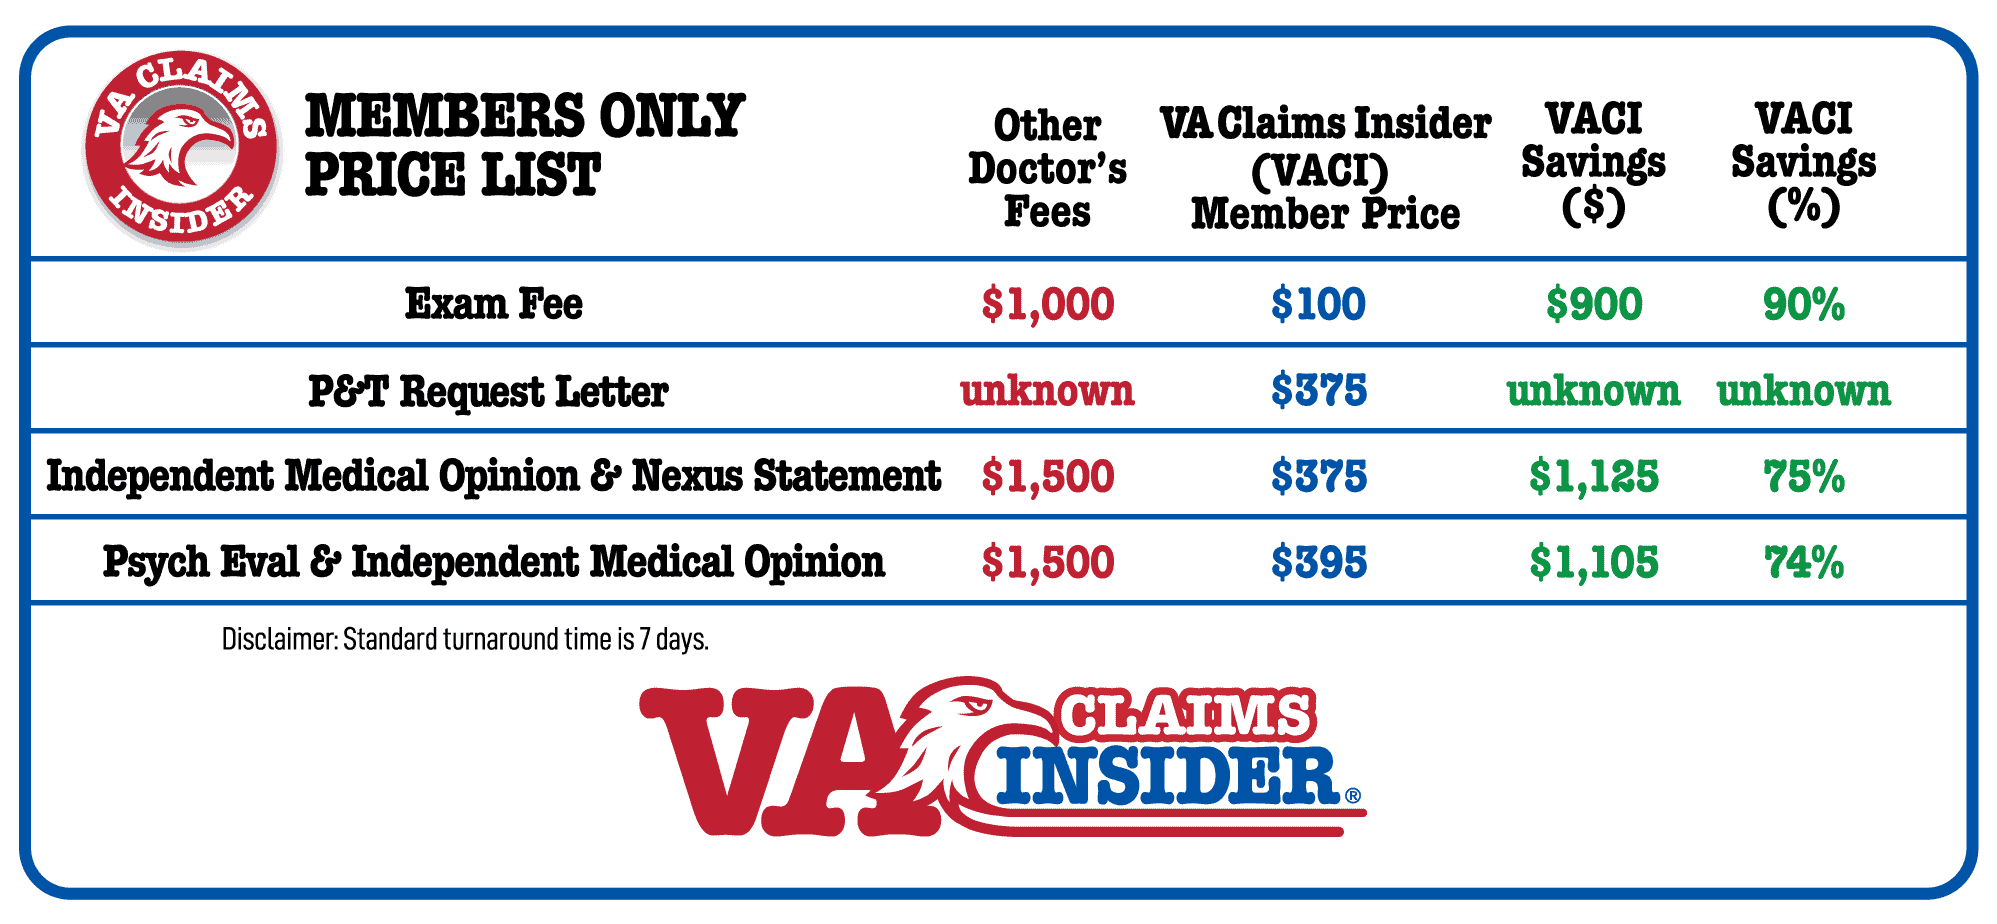 VA Claims Insider Members Only Price List - May 2020